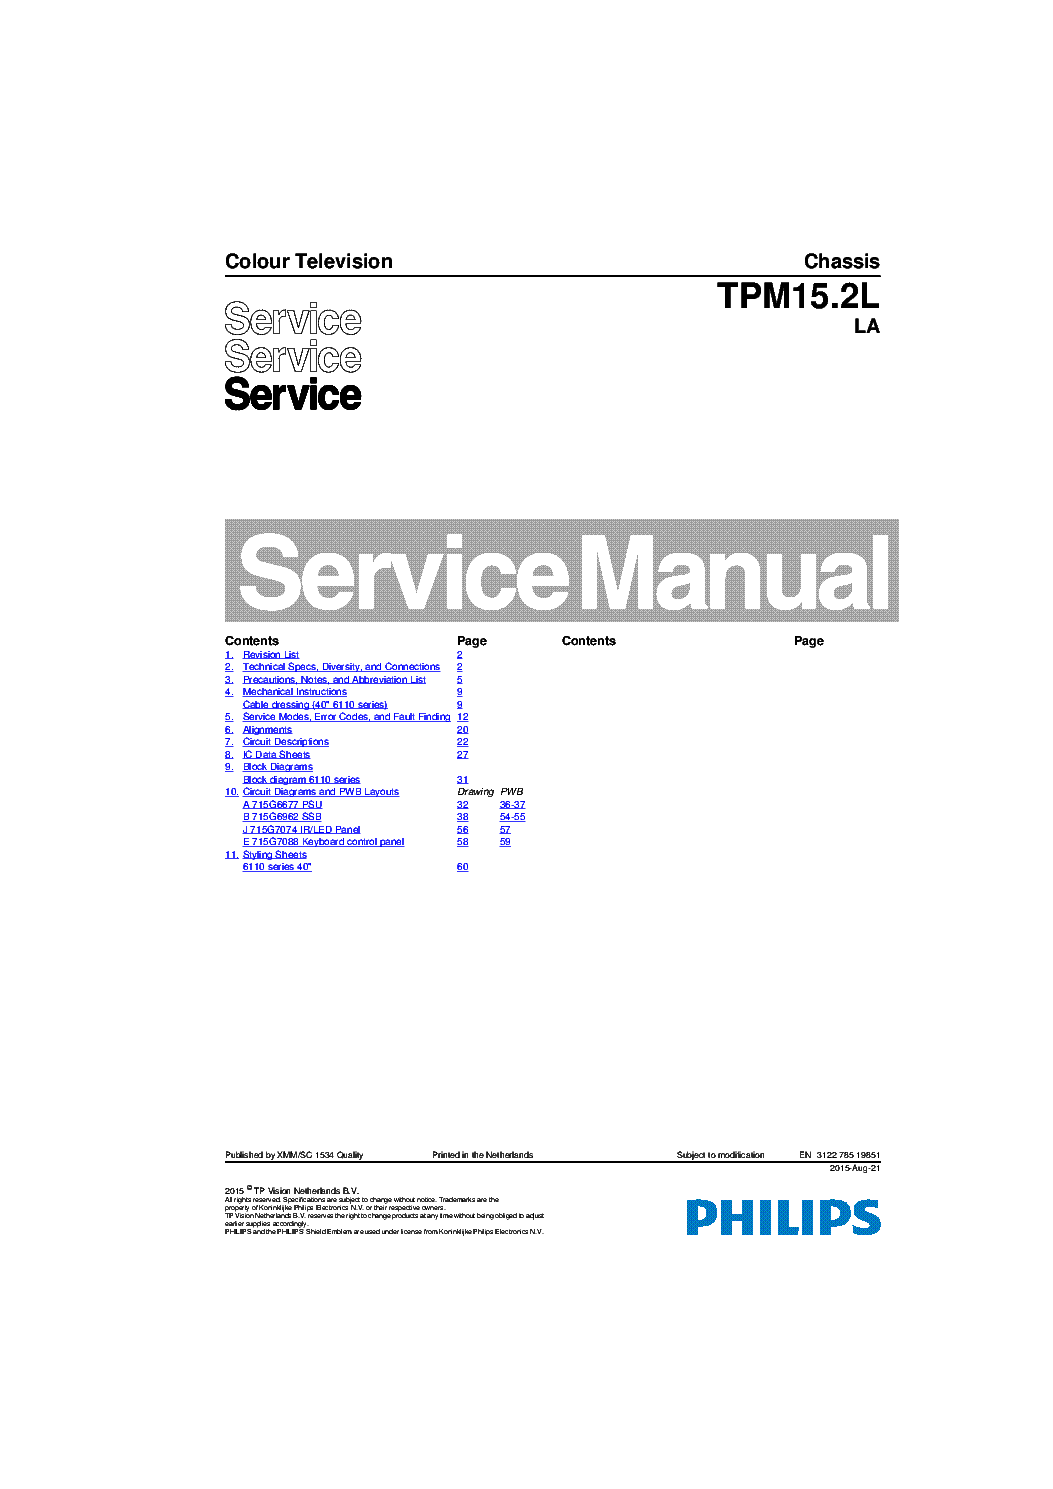 PHILIPS TPM15.2LLA 312278519851 150821 service manual (1st page)